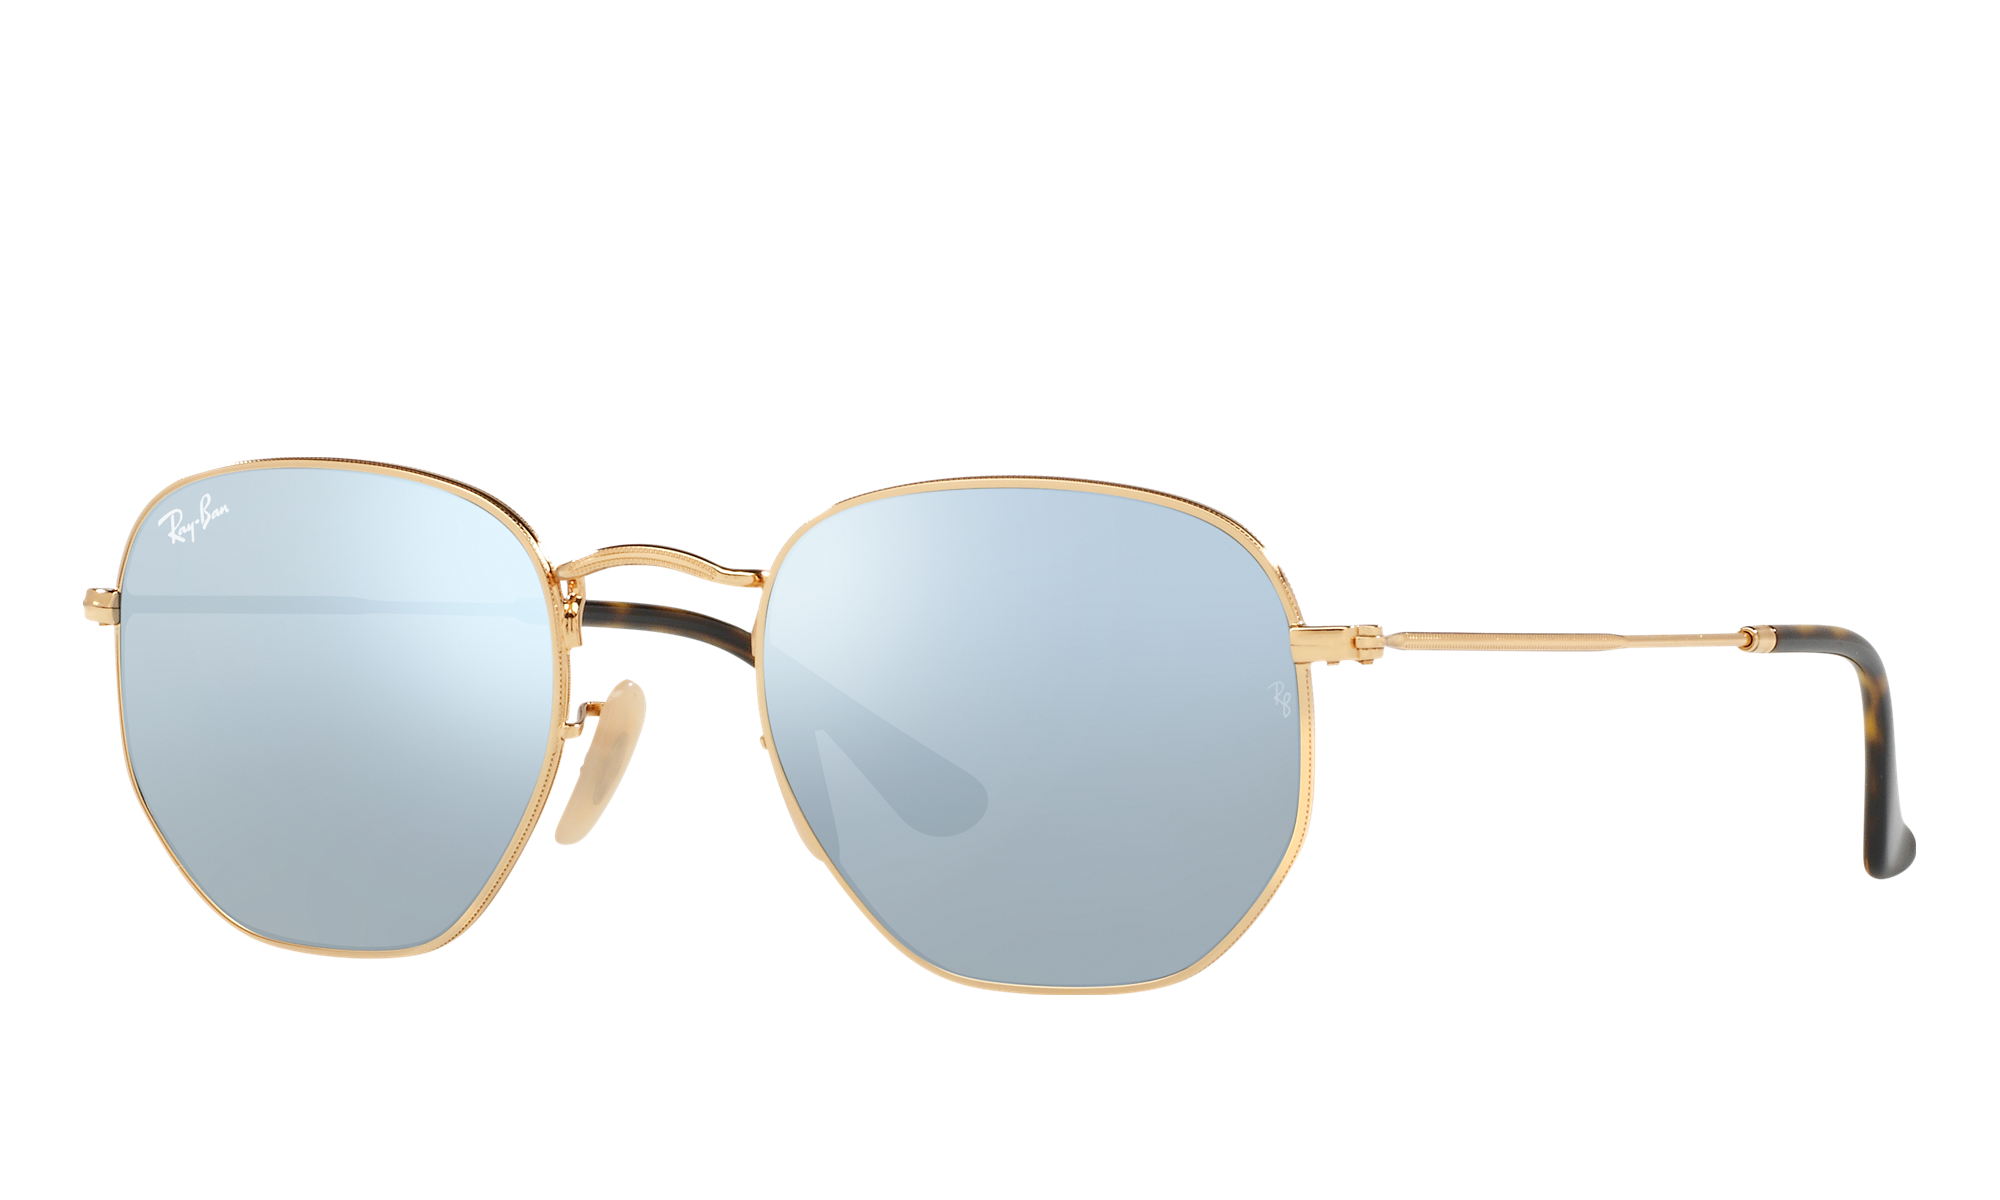 Ray-Ban Unisex Rb3548n Gold Size: Standard